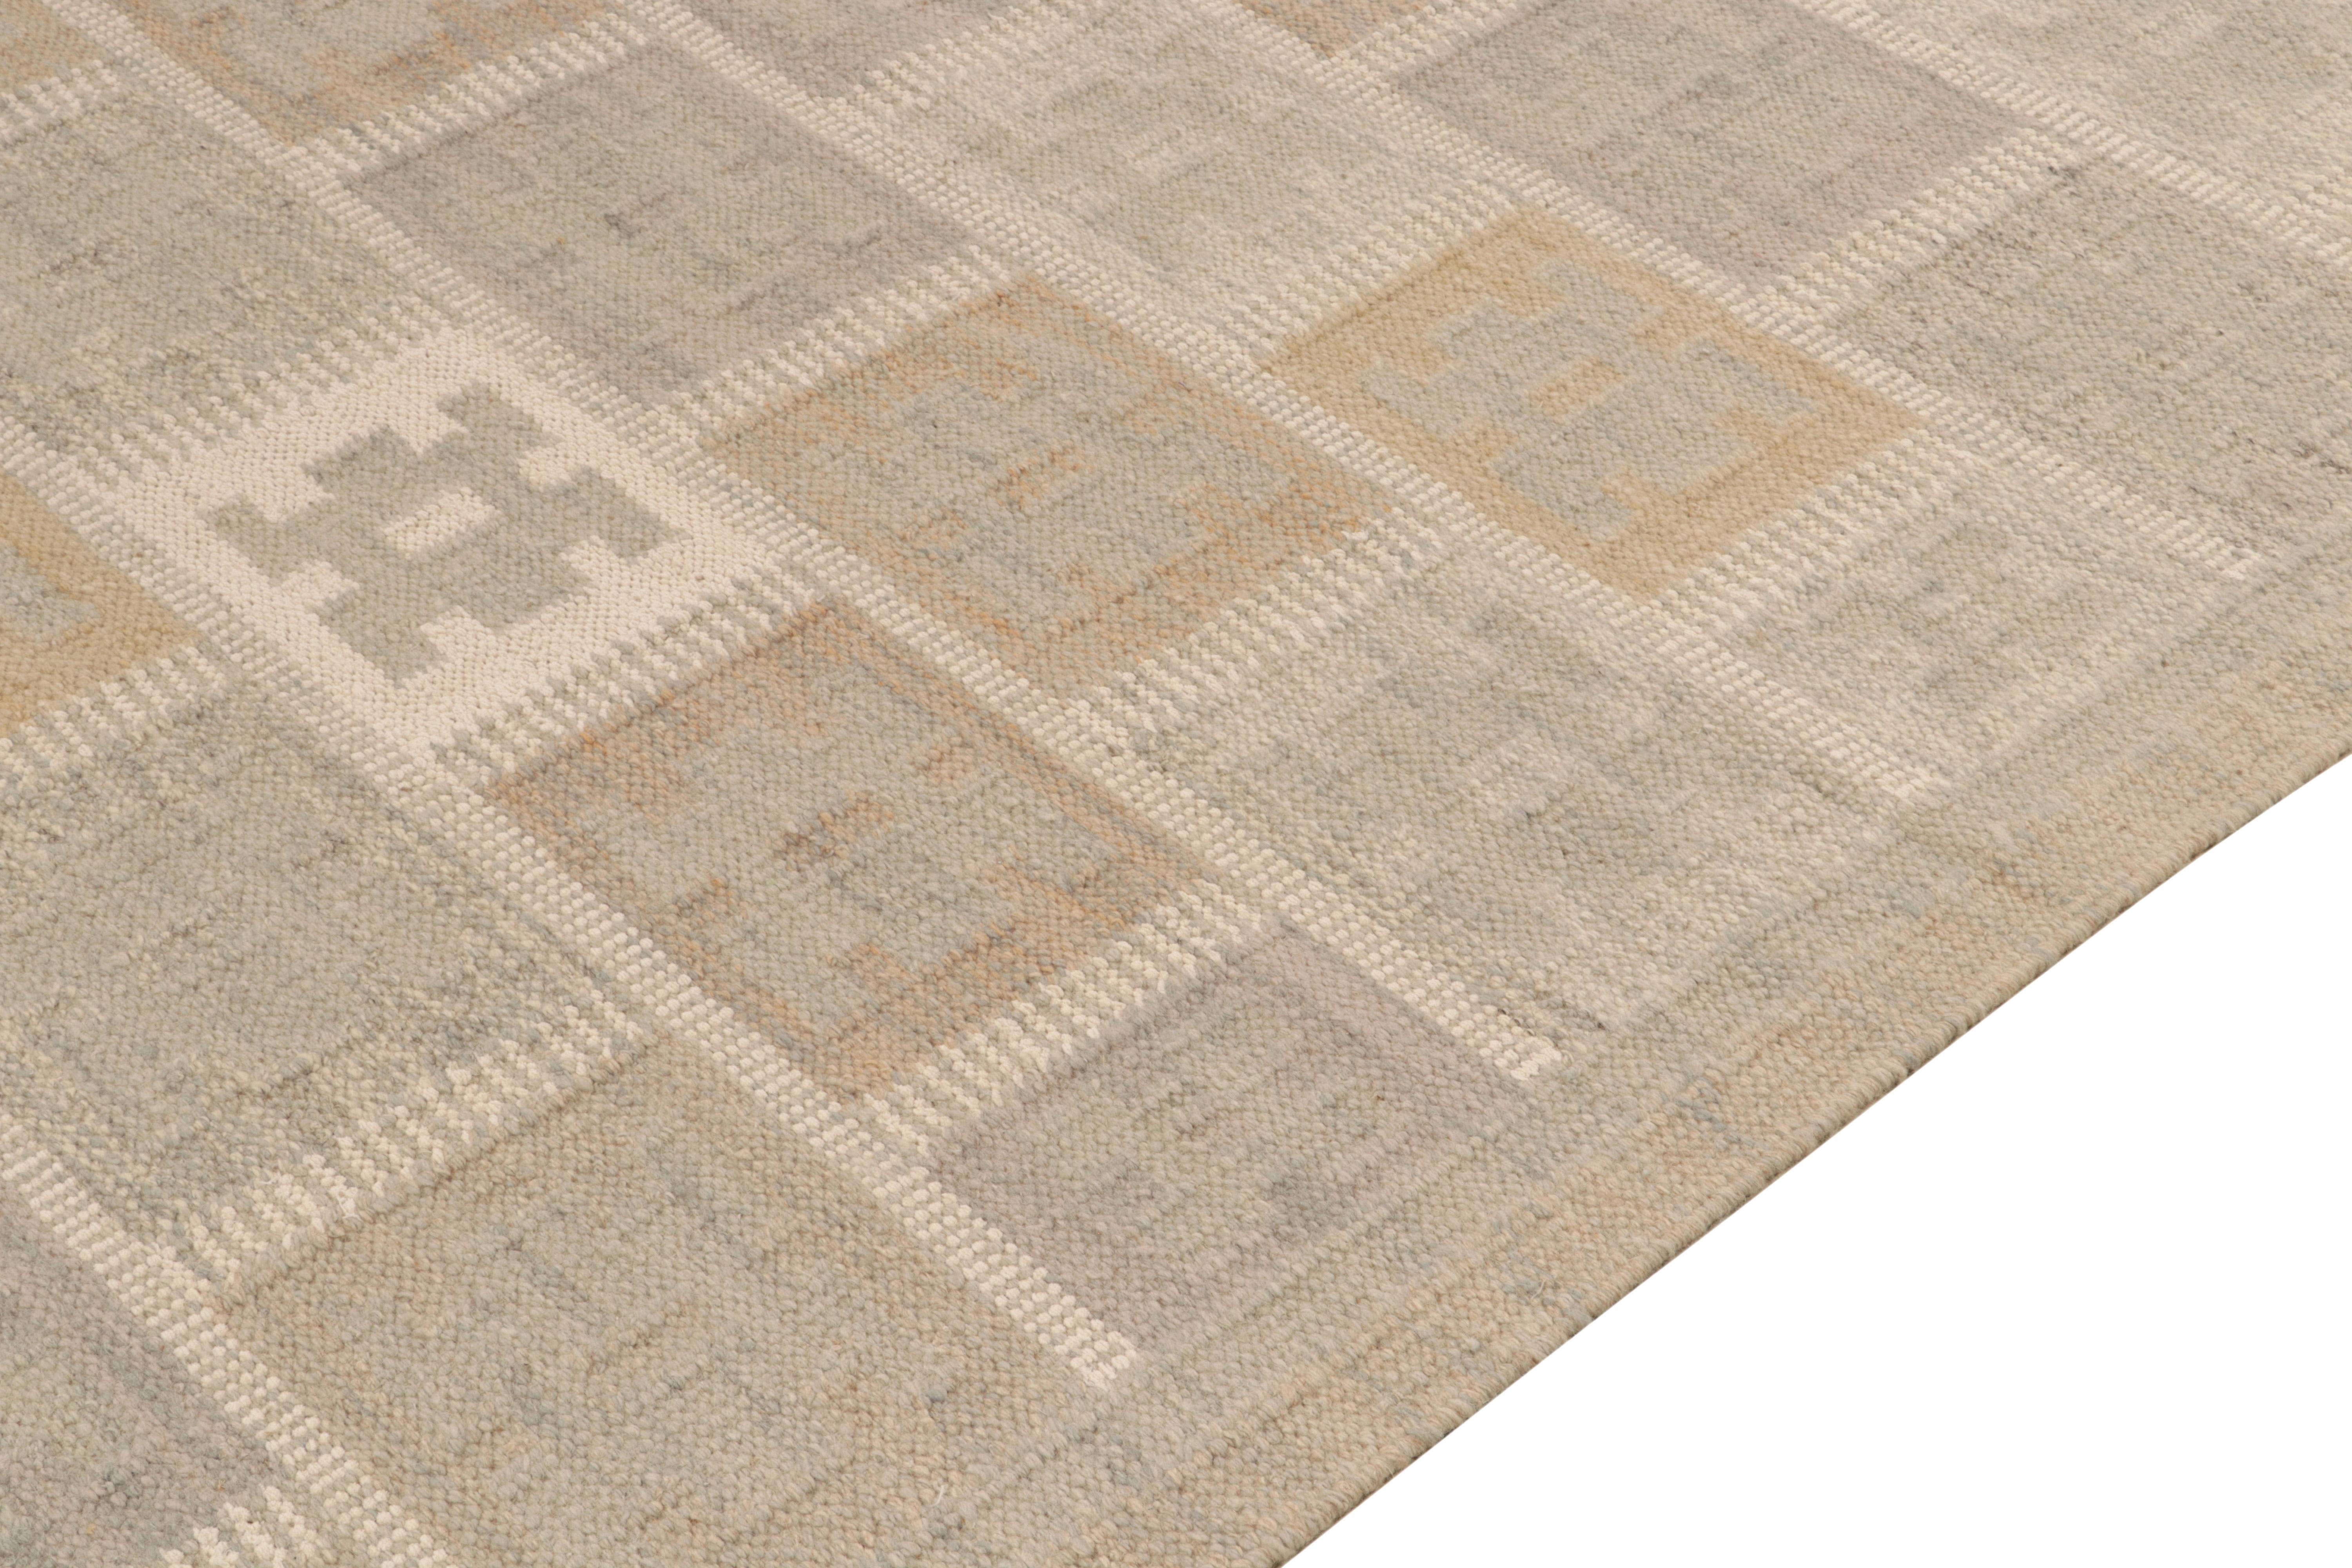 Rug & Kilim's Scandinavian Style Kilim in Gray, Beige-Brown Geometric Pattern In New Condition For Sale In Long Island City, NY